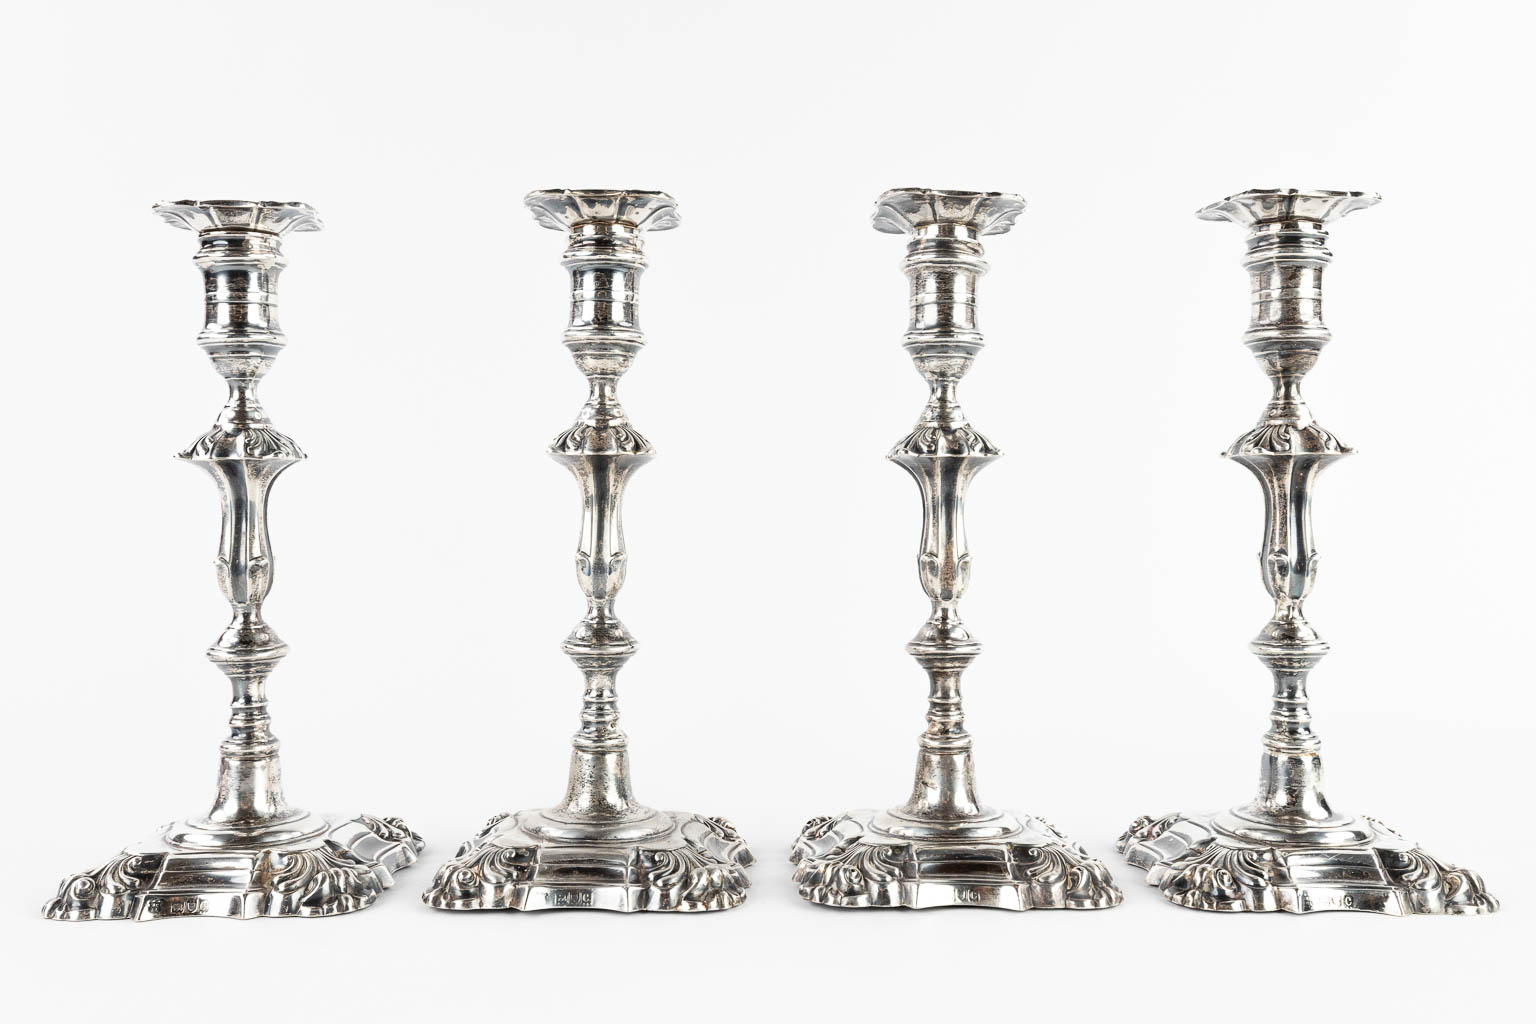 Goldsmiths & Silversmiths Co, London, a set of 4 candle holders, silver. 1898. (D:11,5 x W:11,5 x H:24,5 cm)